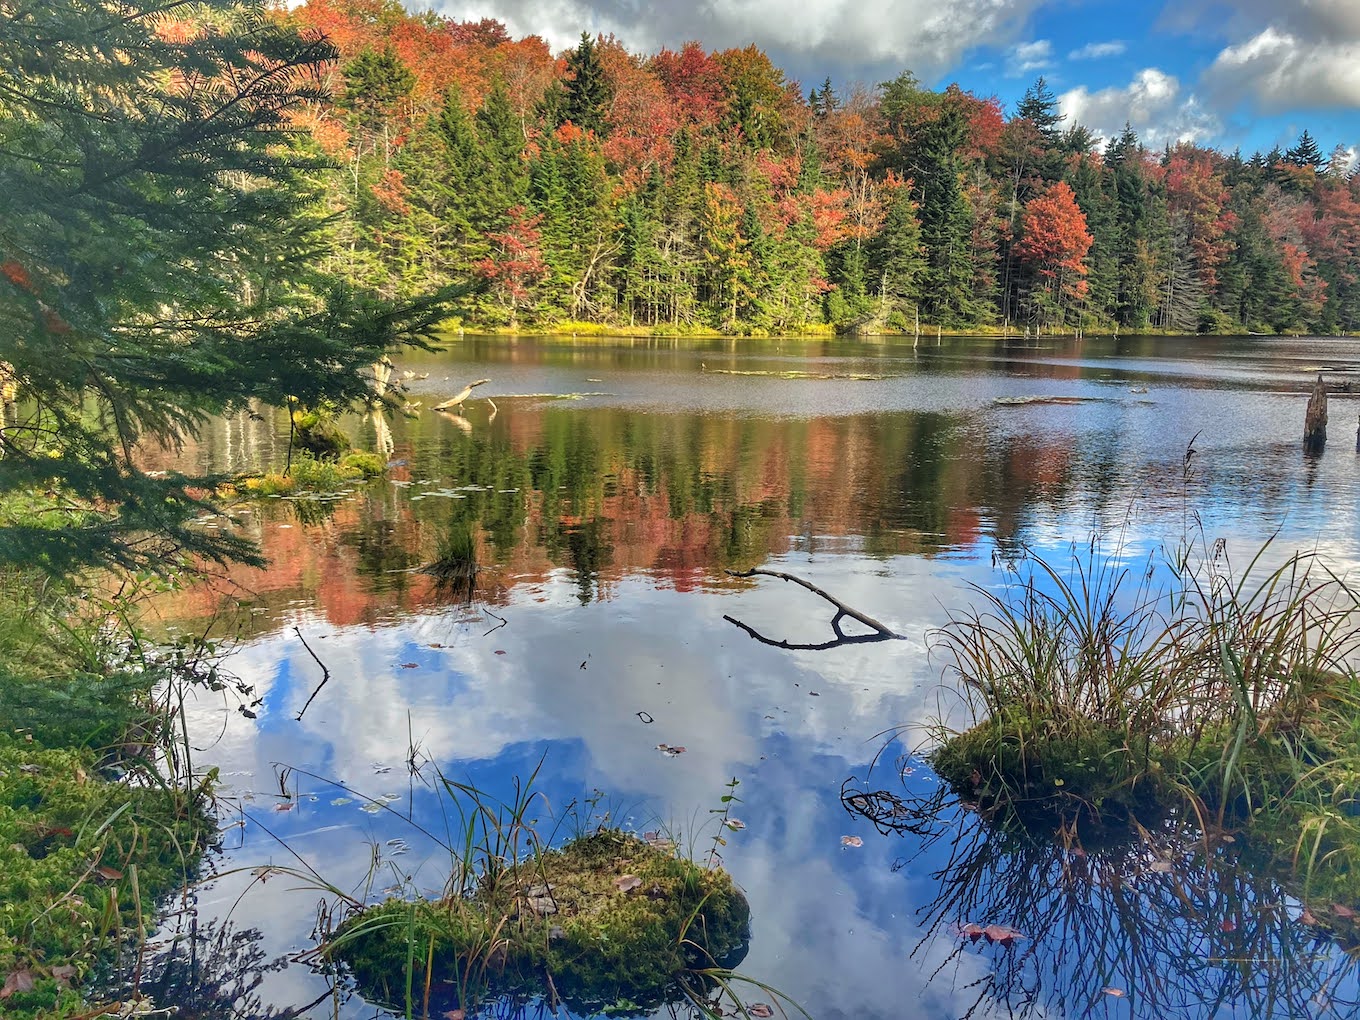 A forest photo featuring fall foliage reflecting on a small pond.